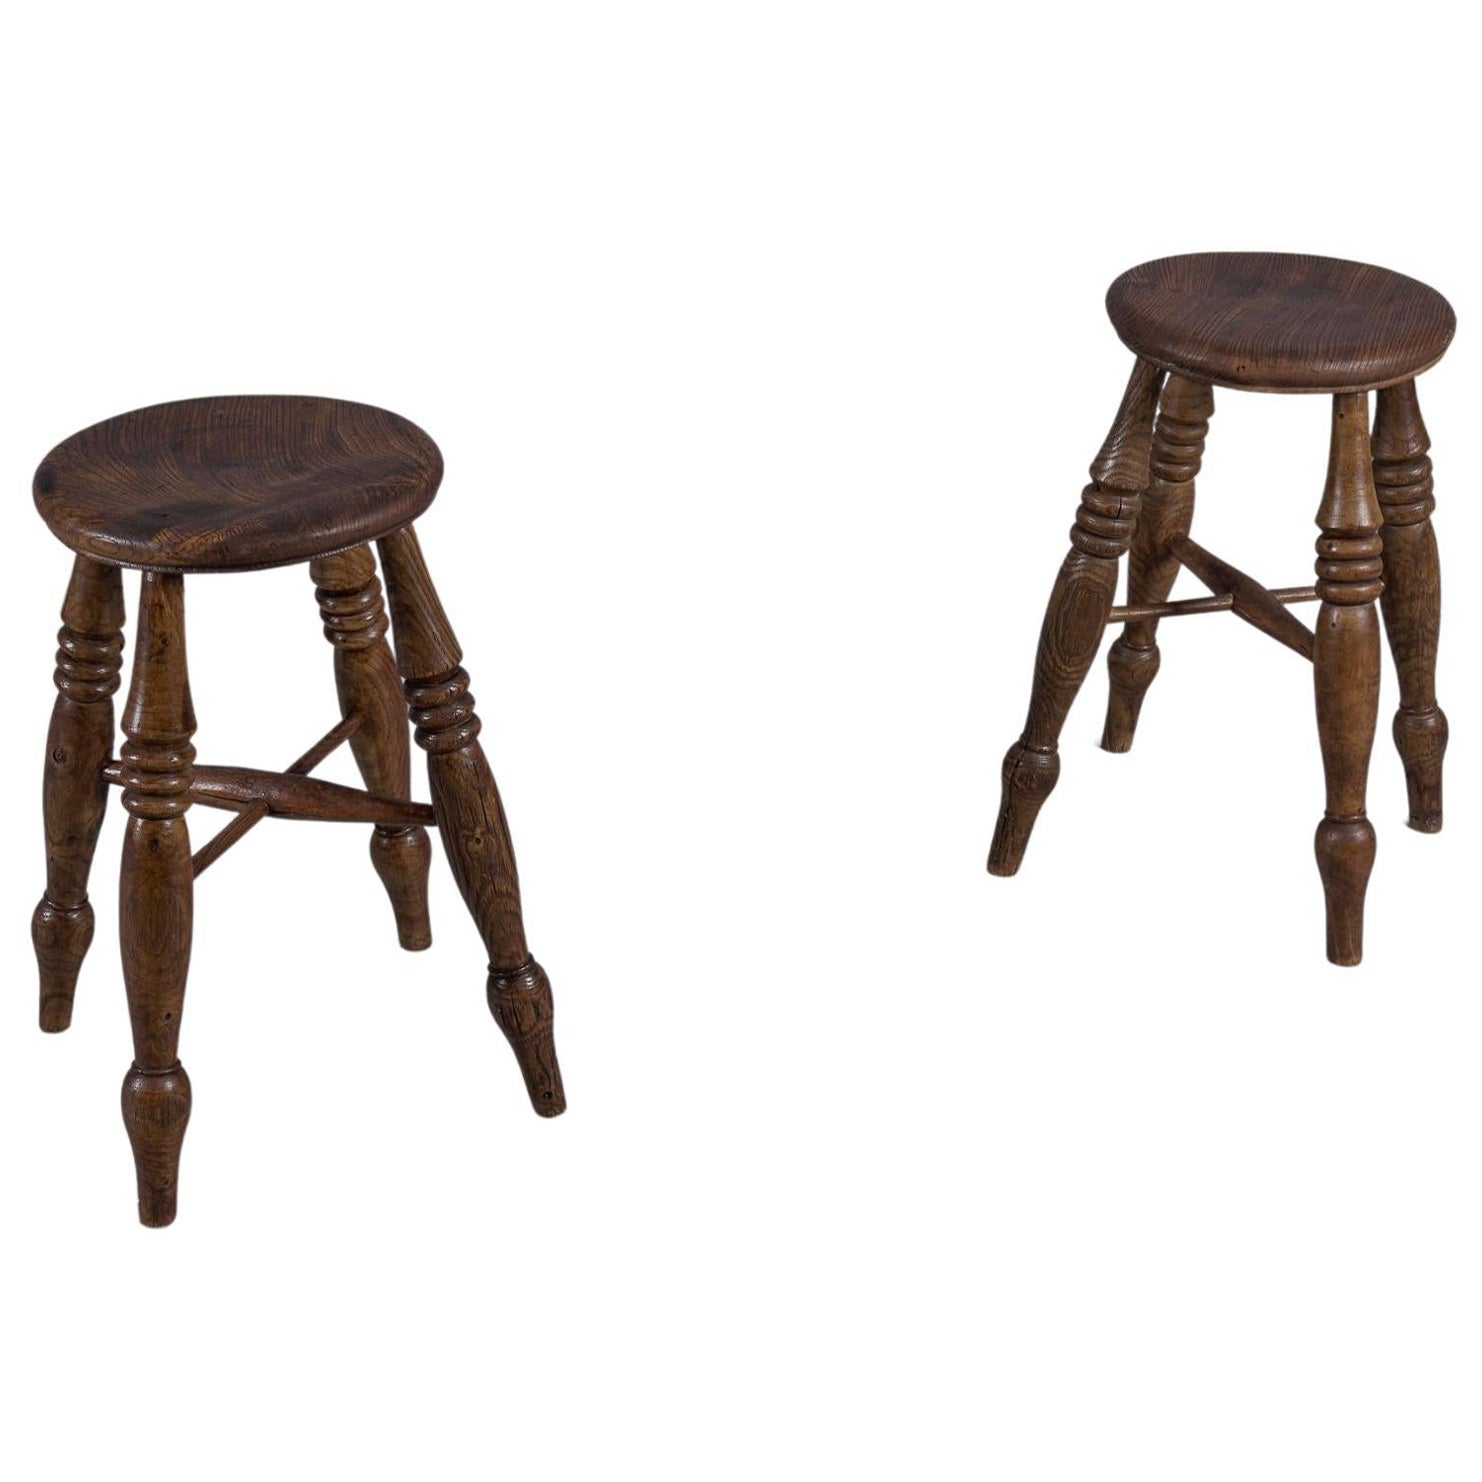 Pair of Lovely Old Wooden Stools, 1950s France